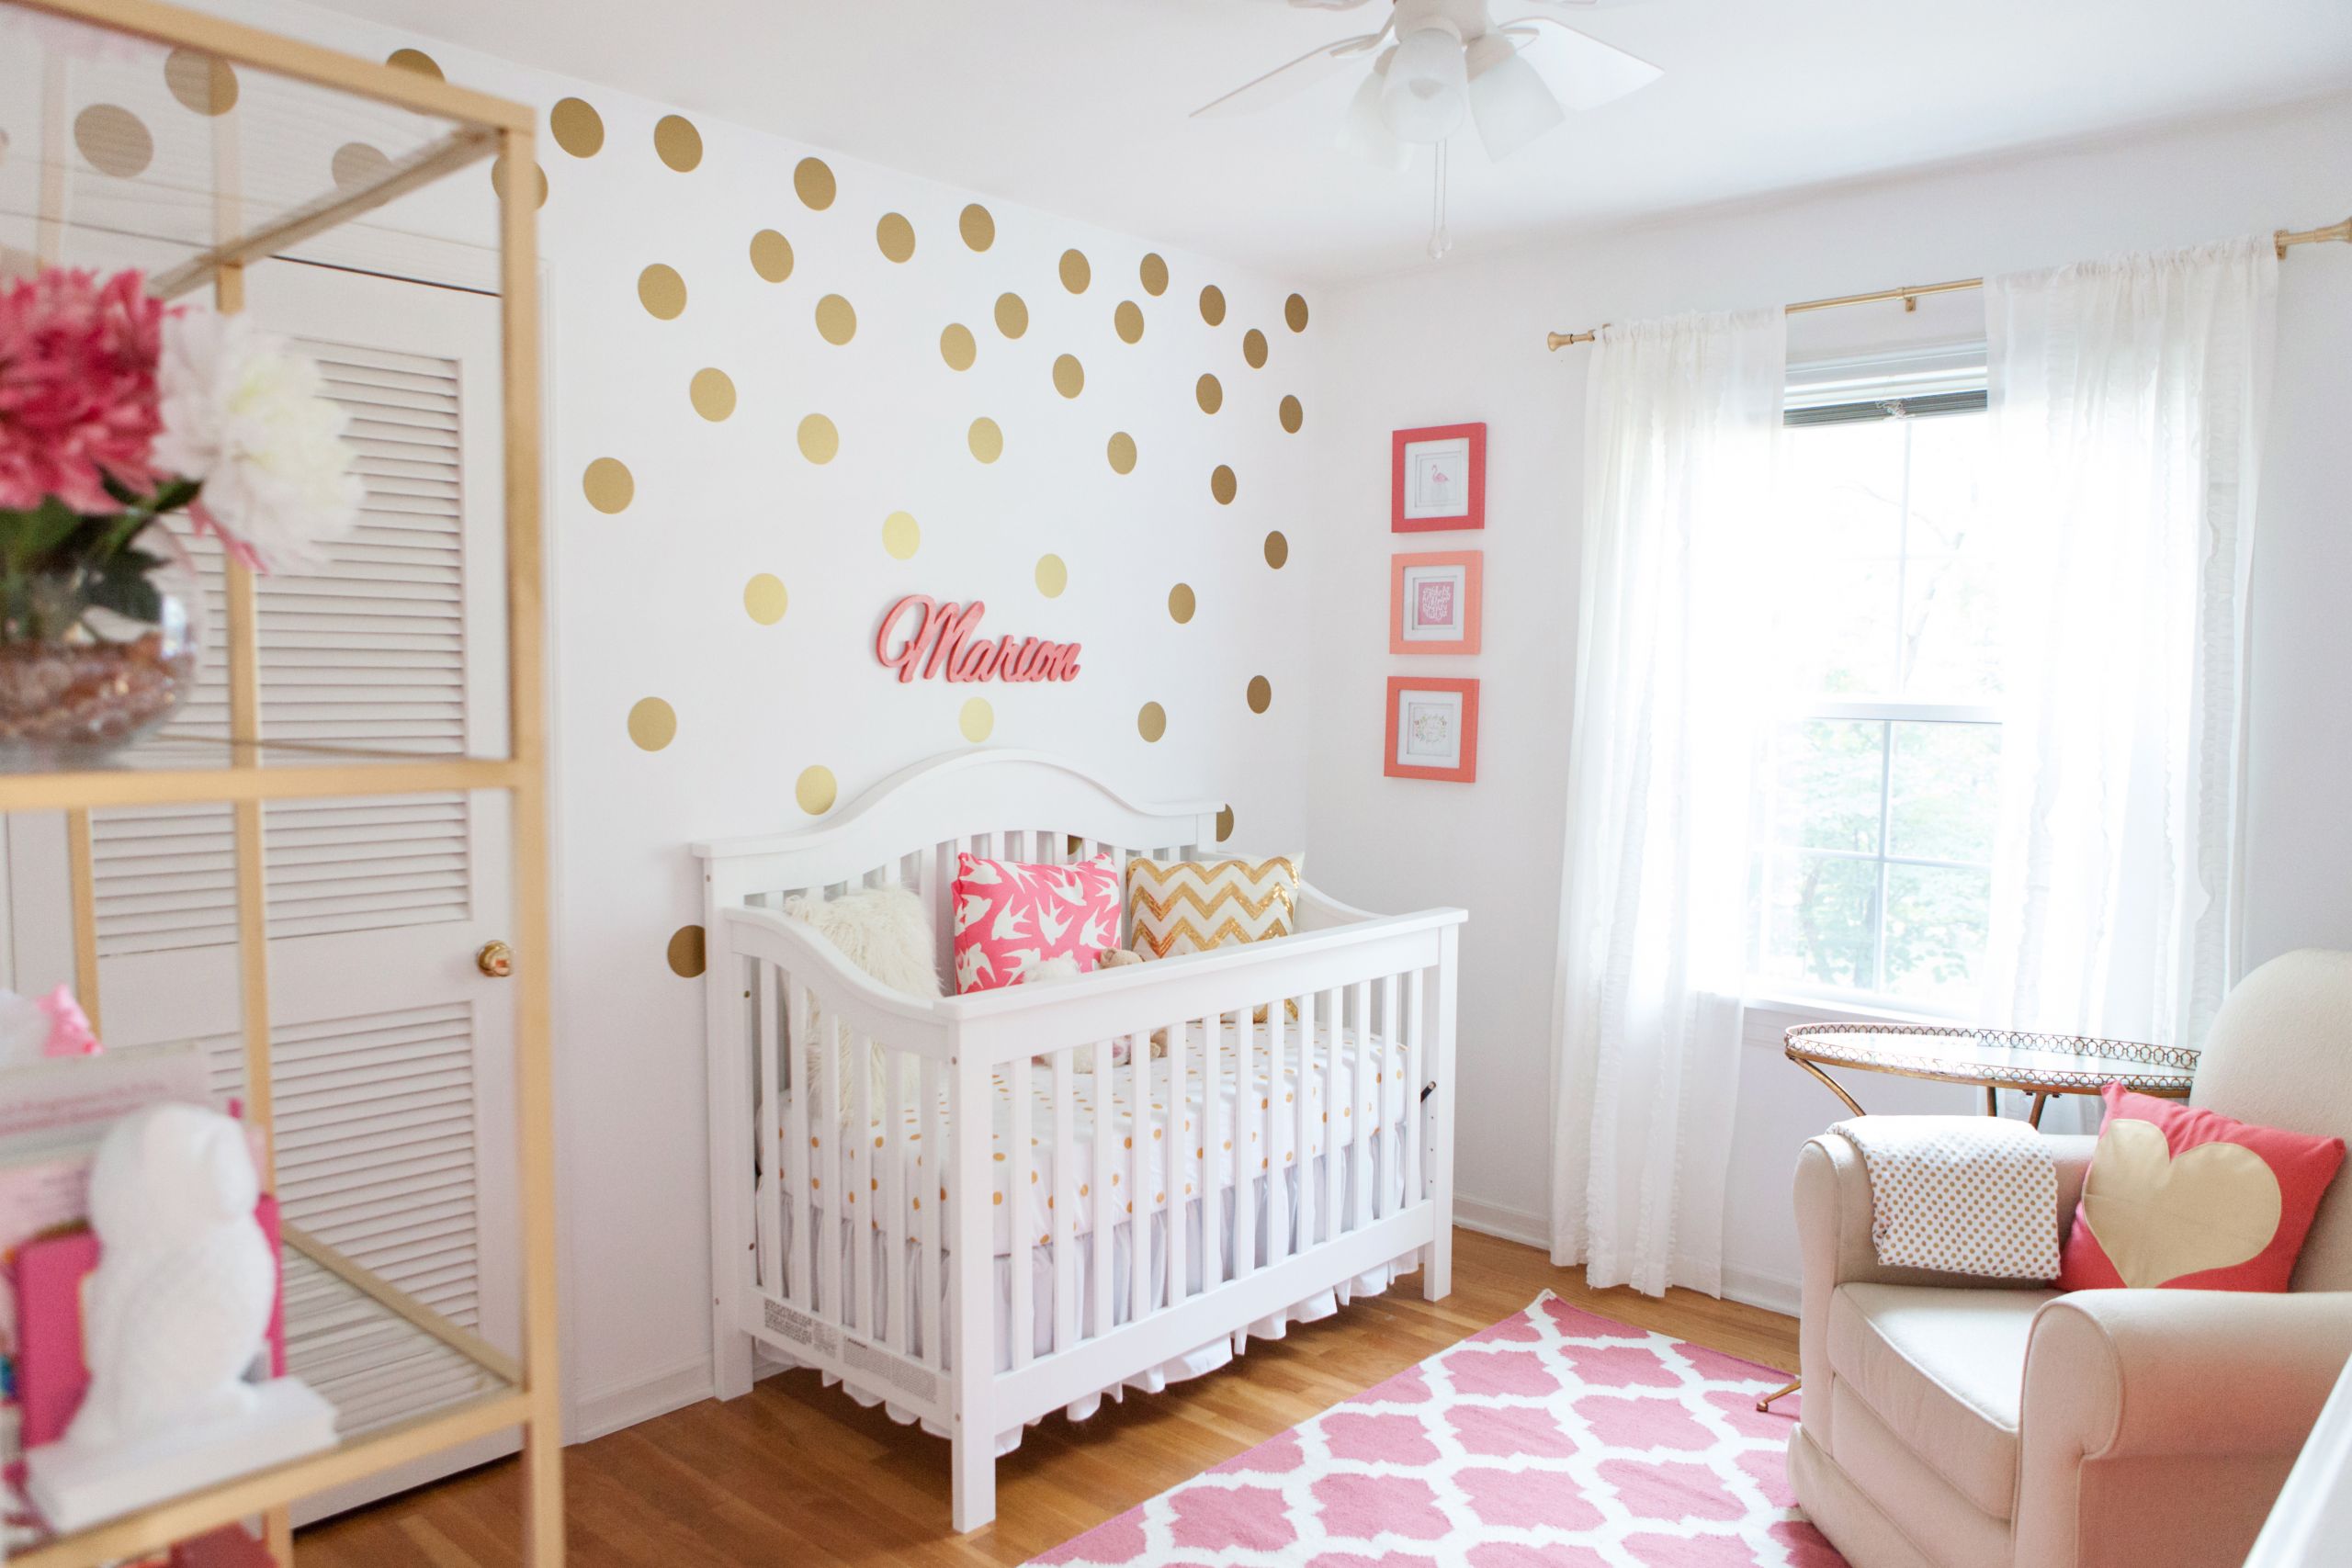 Baby Girl Room Decorating Ideas
 Marion s Coral and Gold Polka Dot Nursery Project Nursery